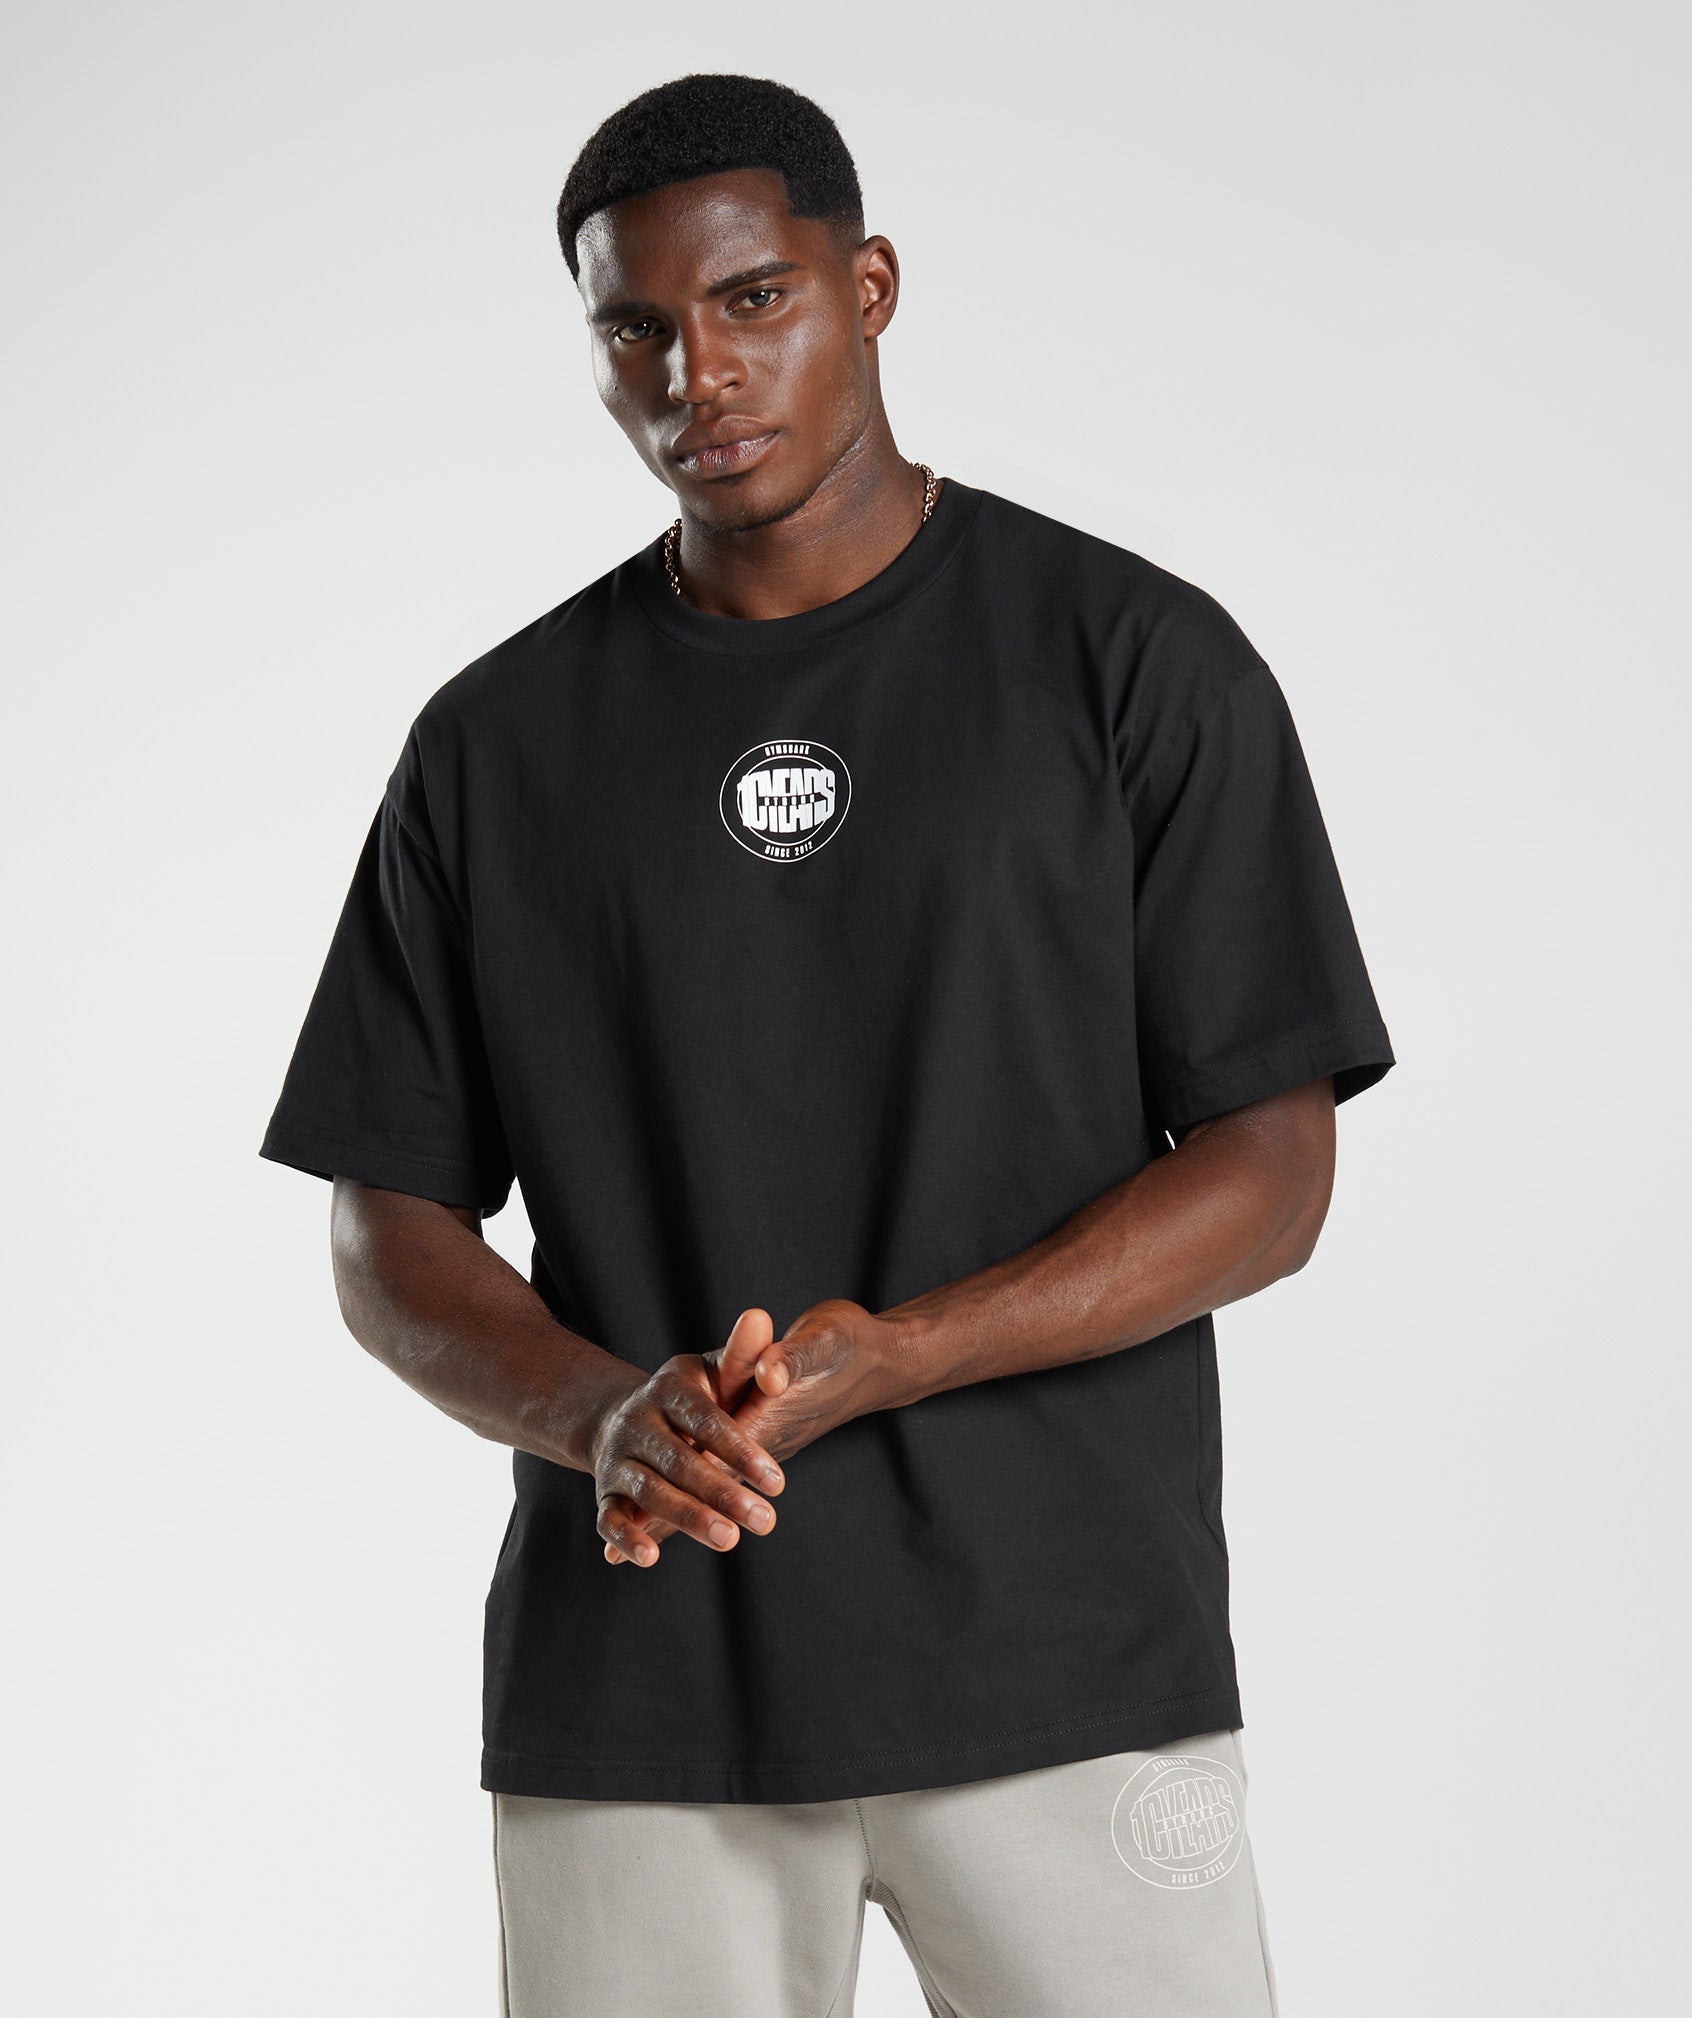 GS10 Year Oversized T-Shirt in Black